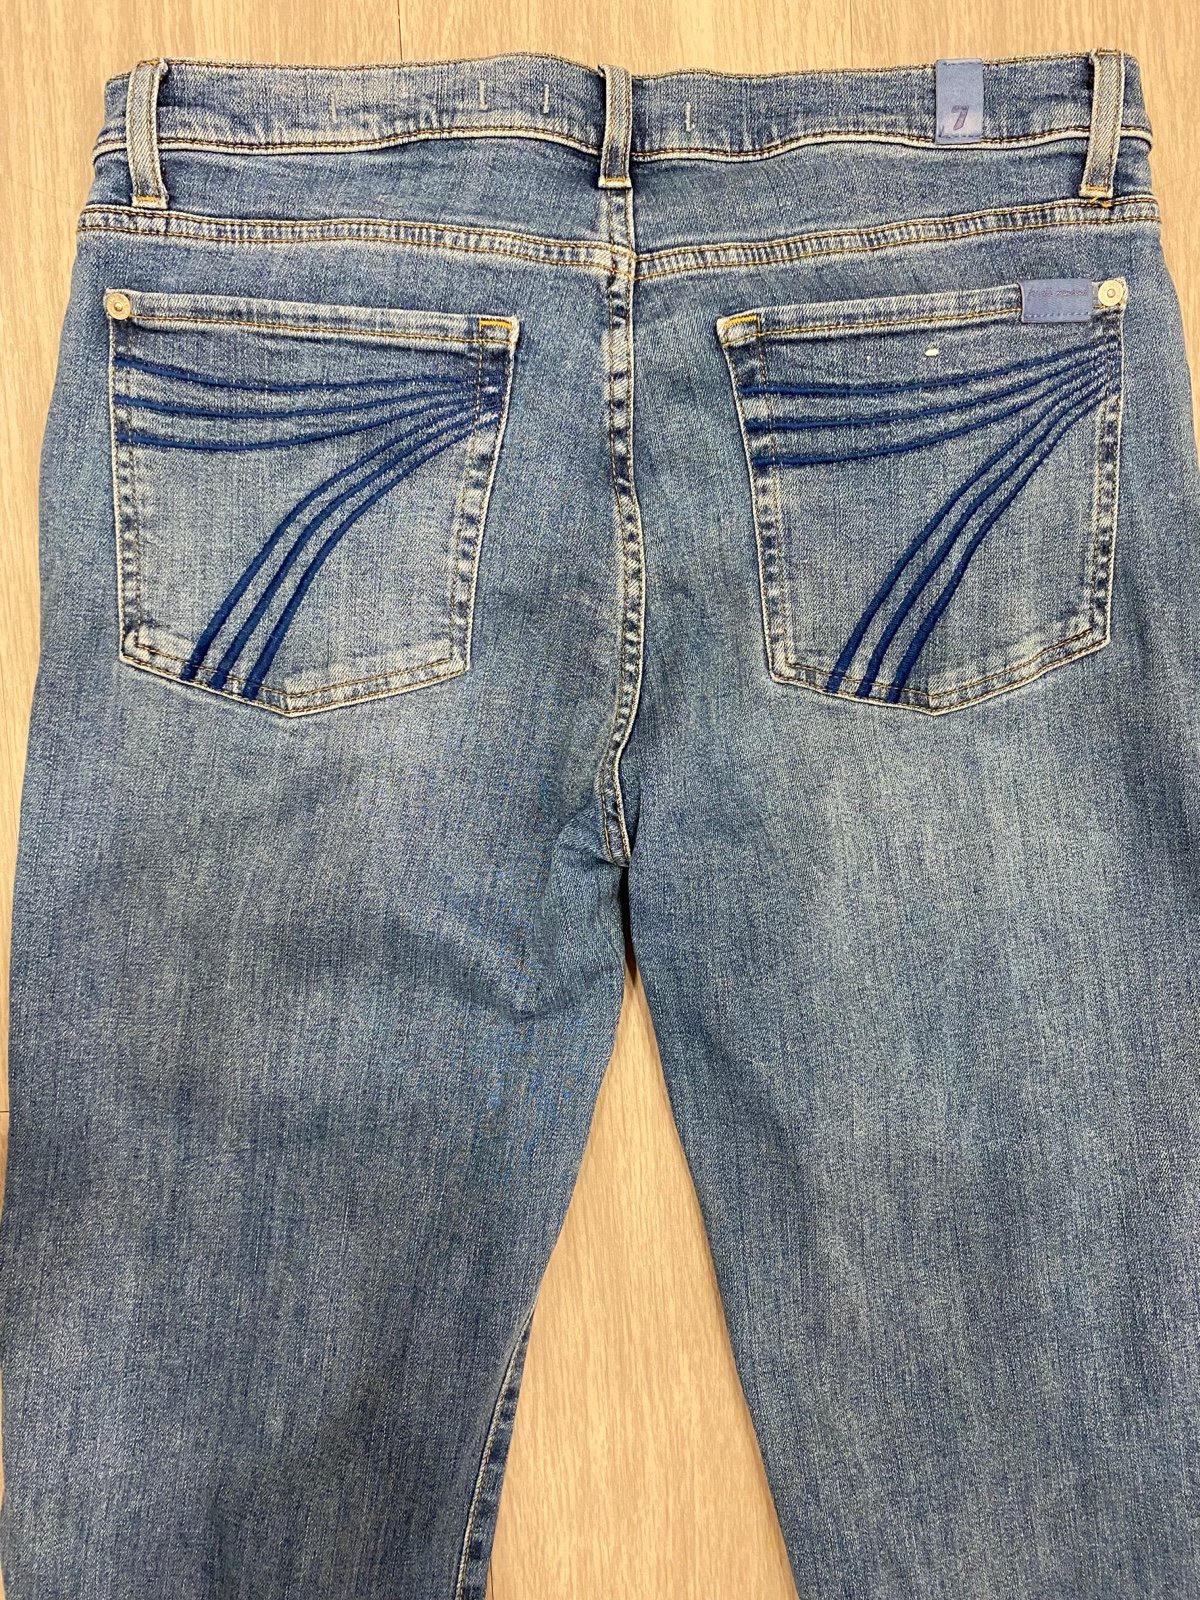 floor price 7 for all Mankind Dojo Flare Wide Leg Jeans Women 31x34 Blue Wash Zip Fly USA lGjuITSGD Wholesale